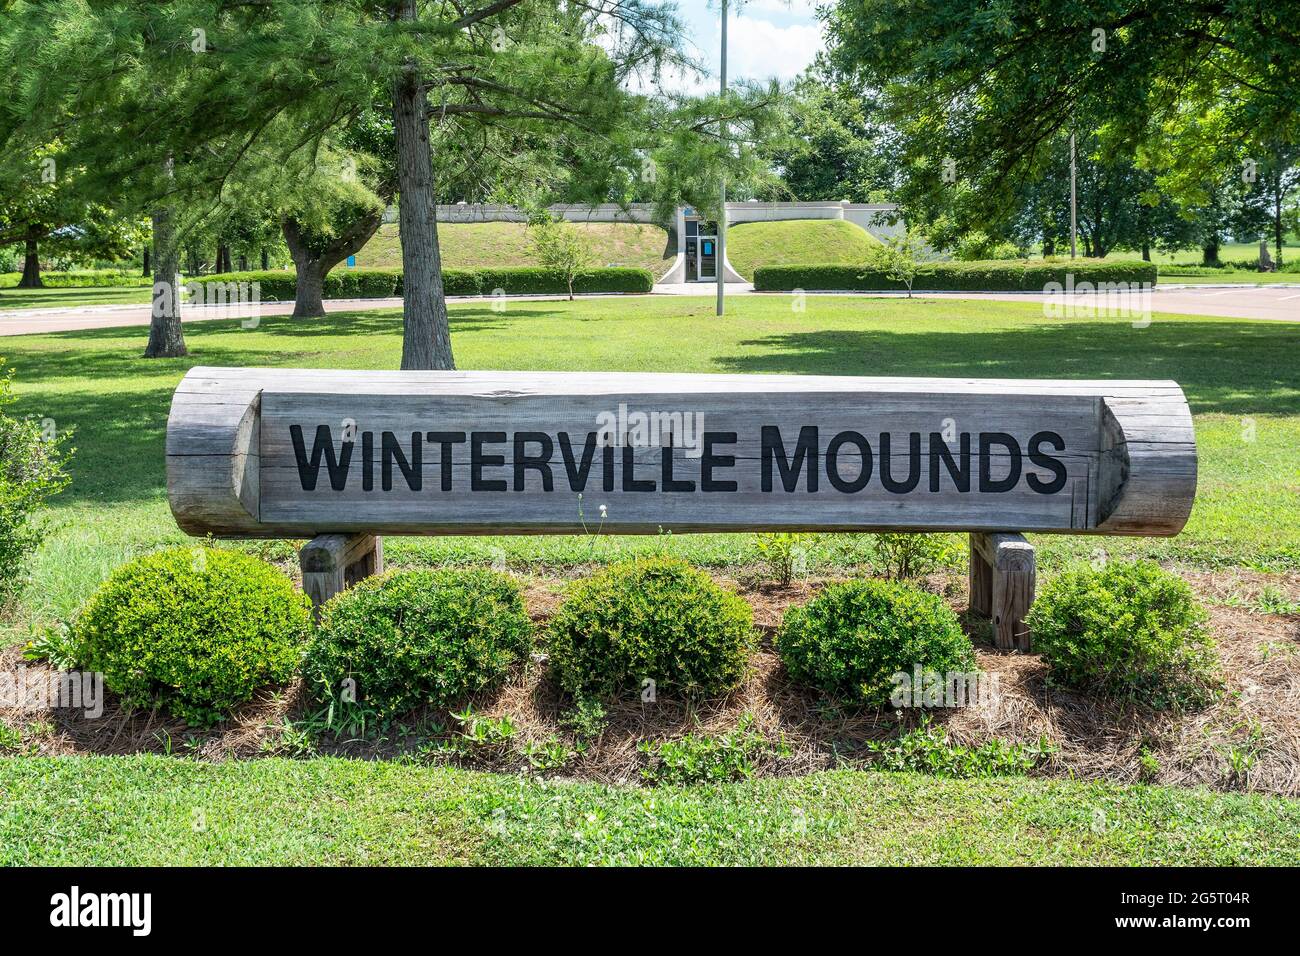 Winterville Mounds one of the largest Native American mound sites in the United States near Greenville, Mississippi, USA. Stock Photo